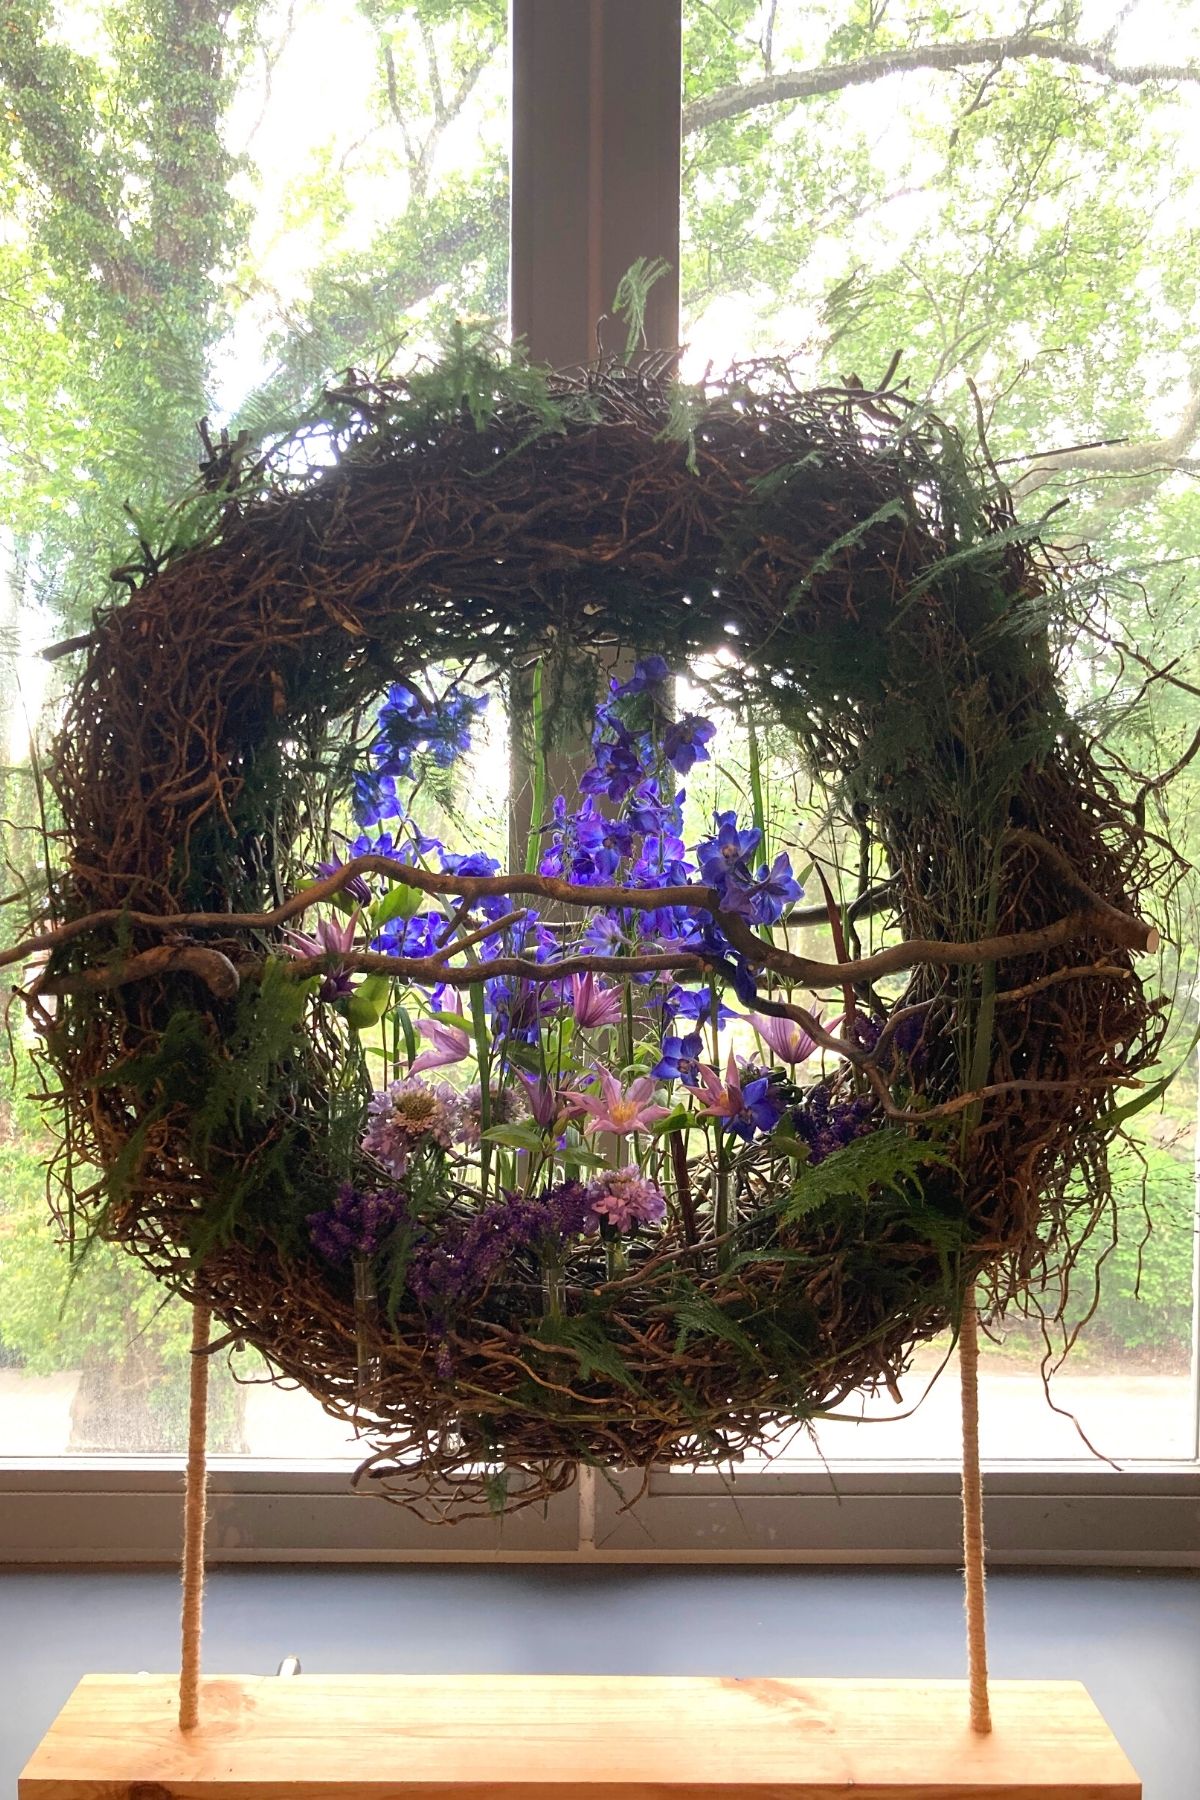 Wreaths Made by Hand With Delicate Flowers as Clematis, Veronica Spray, Delphinium and more by Martine Meeuwssen on Thursd